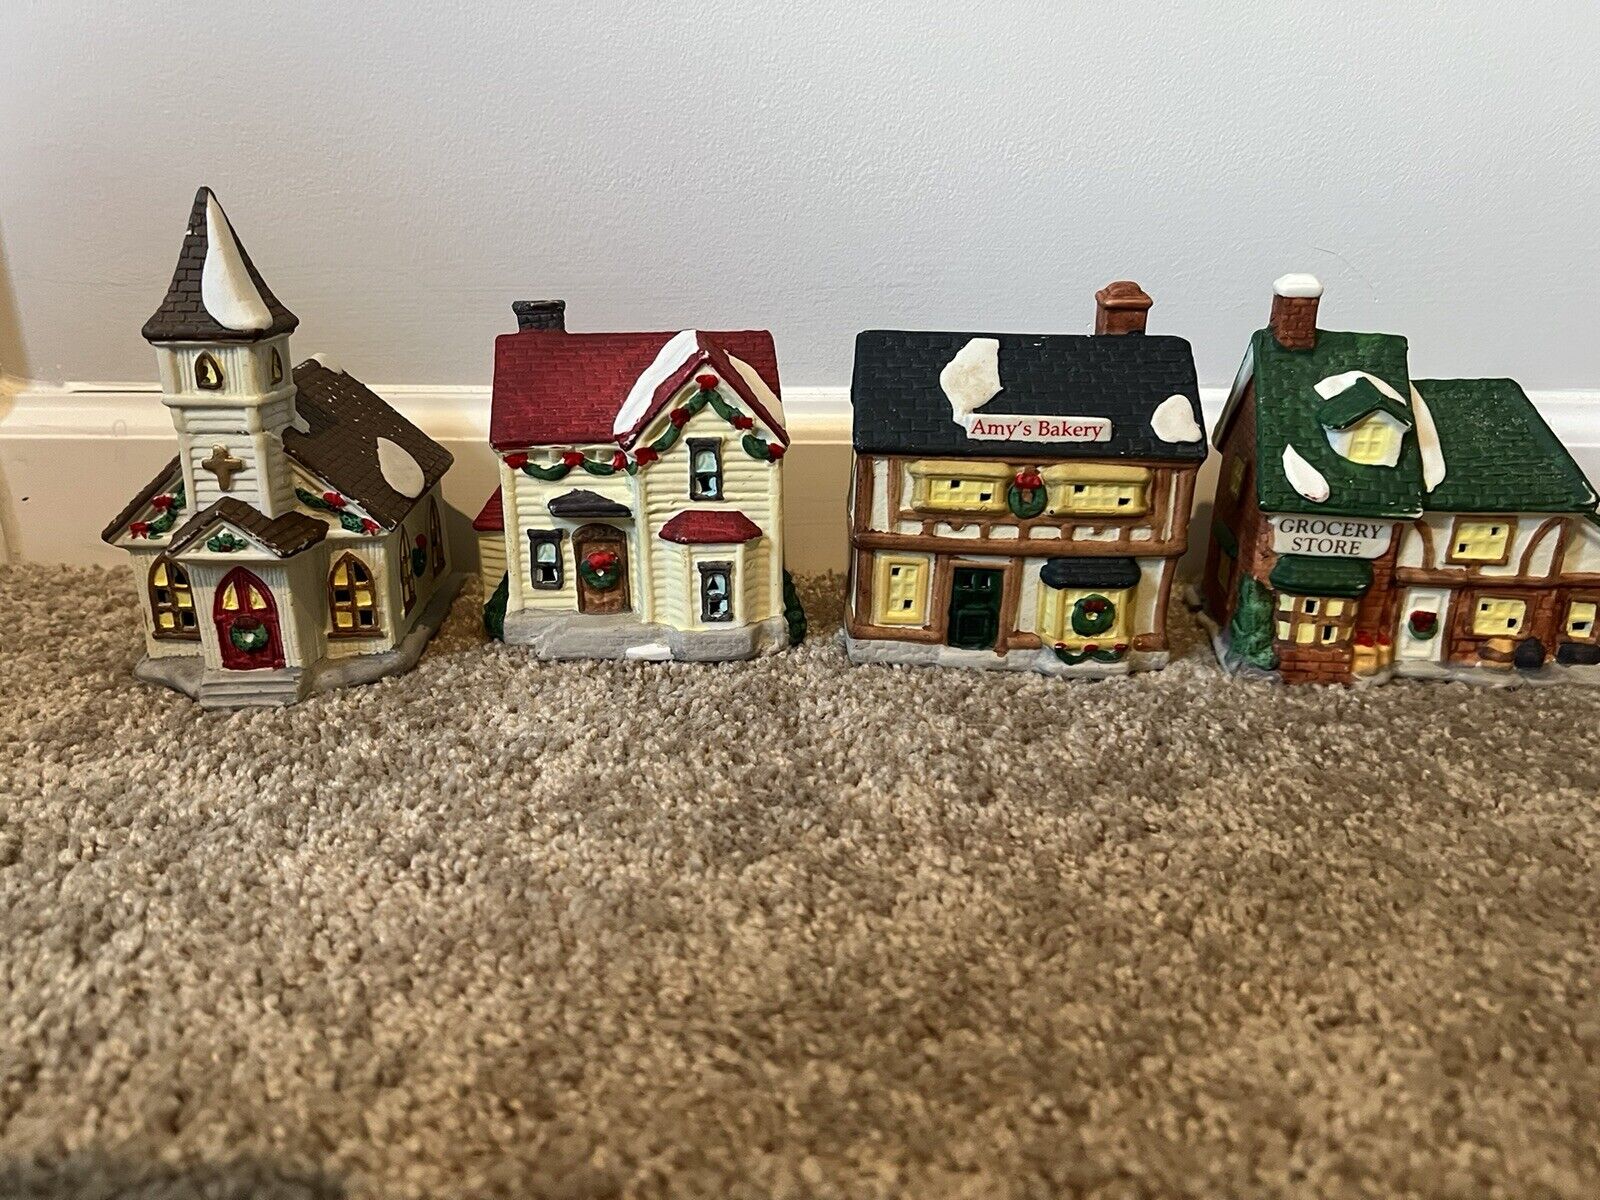 VTG Noma Dickensville Christmas Village 4 Piece Set Collectables Bakery Church